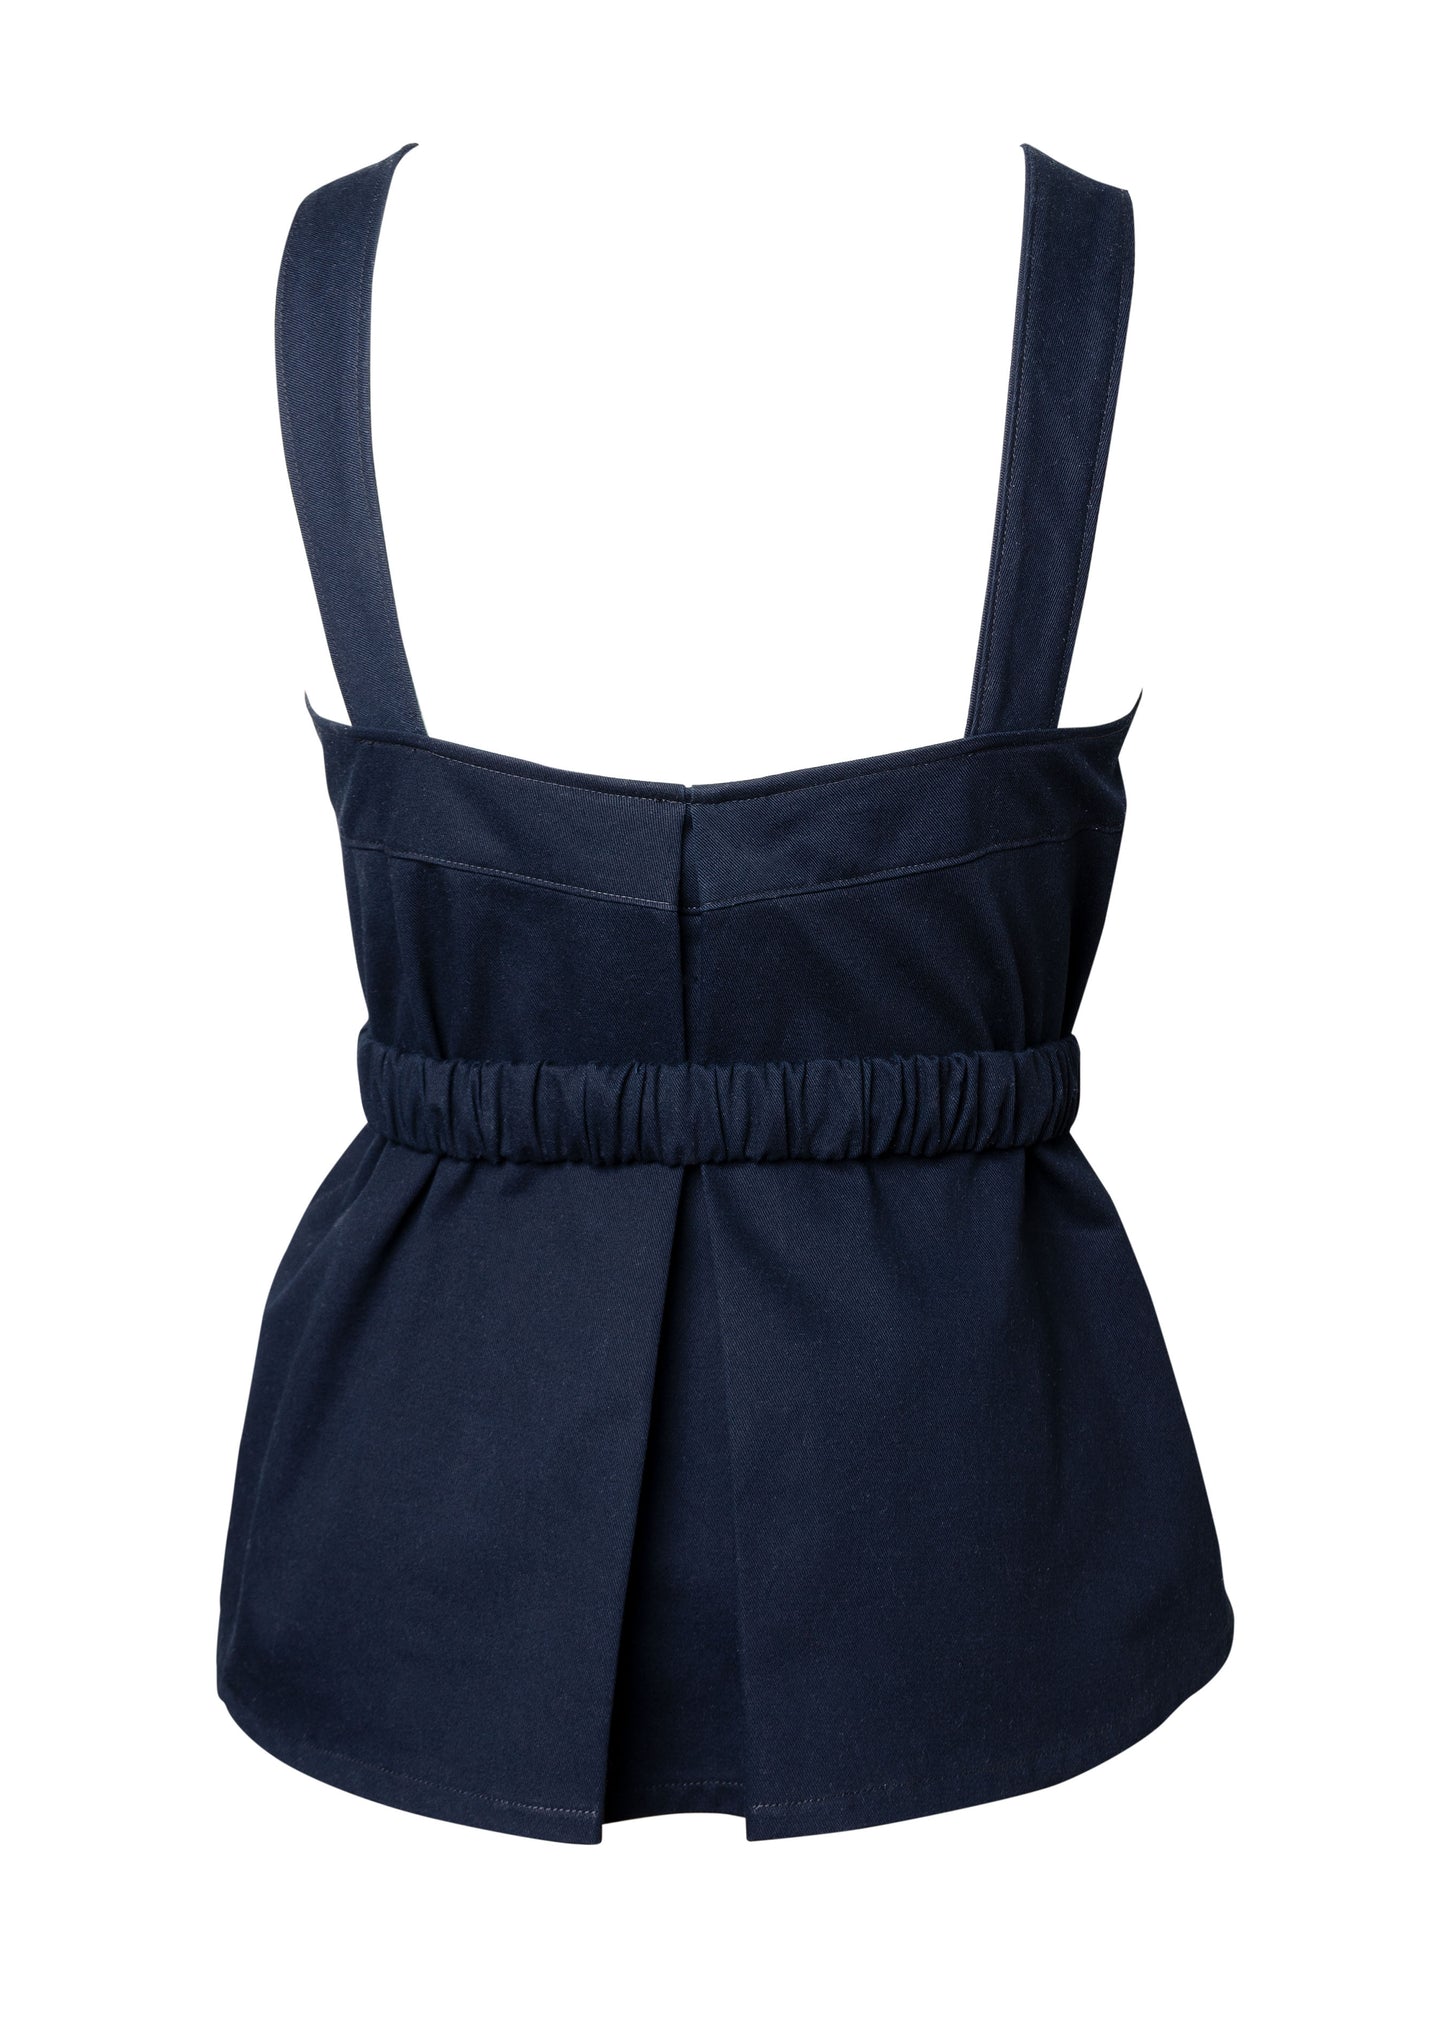 A-line denim tank top with curved "faux bustier" design lines, slight hi-lo hem, low back and centre back pleat detail. Comes with removable fabric belt. We love the versatility and casual glamour of this tank top. The structured silhouette is ultra flattering and the low back makes it a little flirty. Tuck it into high waisted shorts for an everyday look, or add the belt if you want to show off that waistline. Made from 10oz cotton twill. 